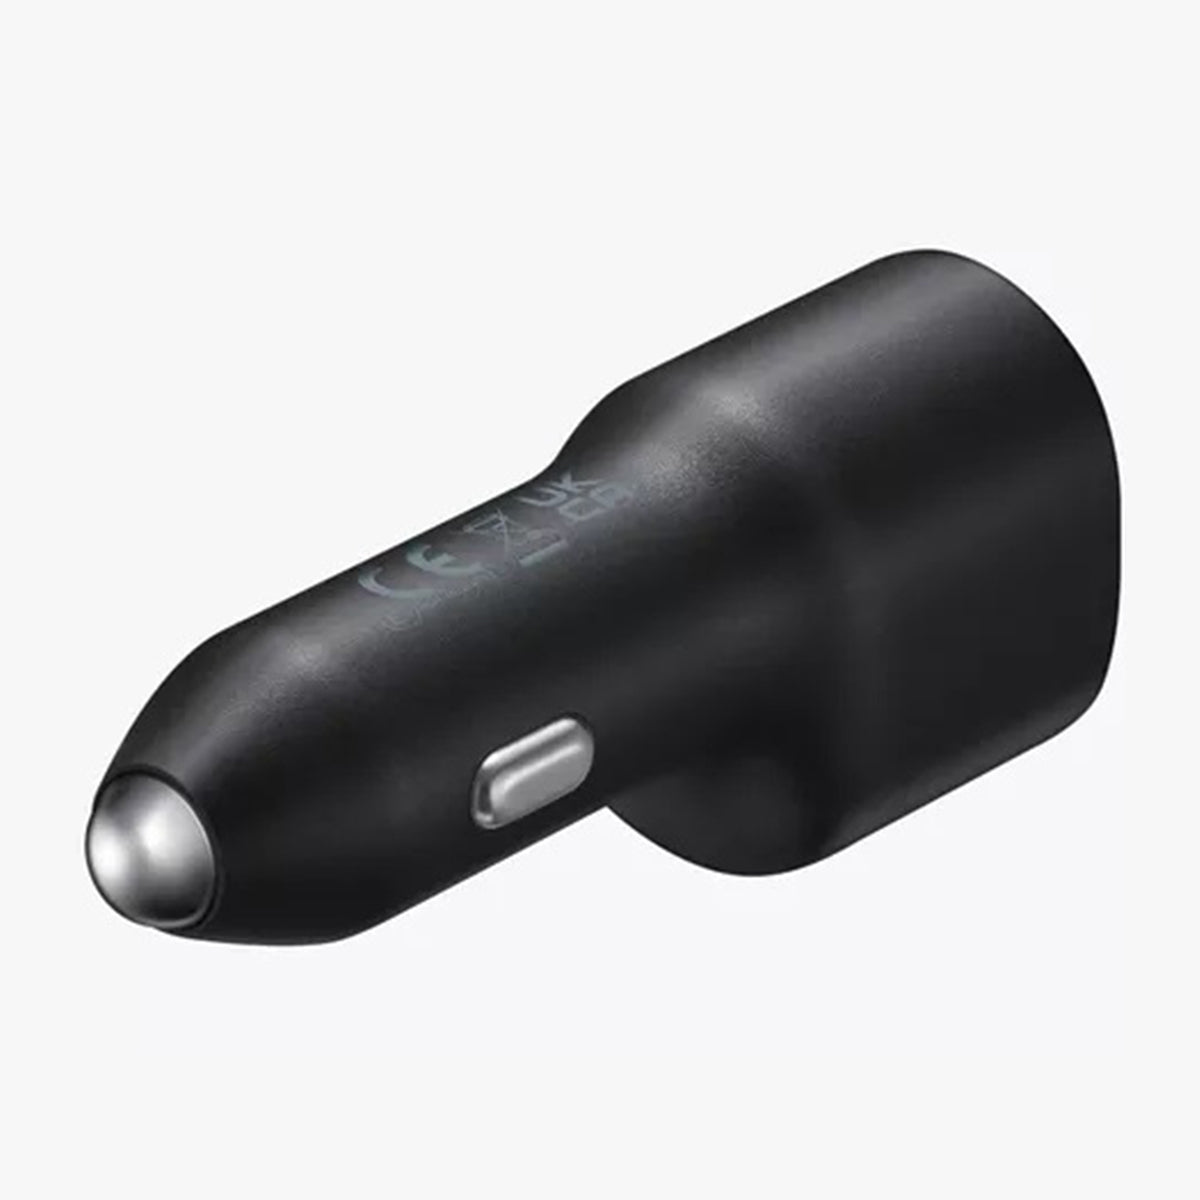 Samsung Dúo Coche Superrápido  - Samsung Duo Super Fast Car Charger